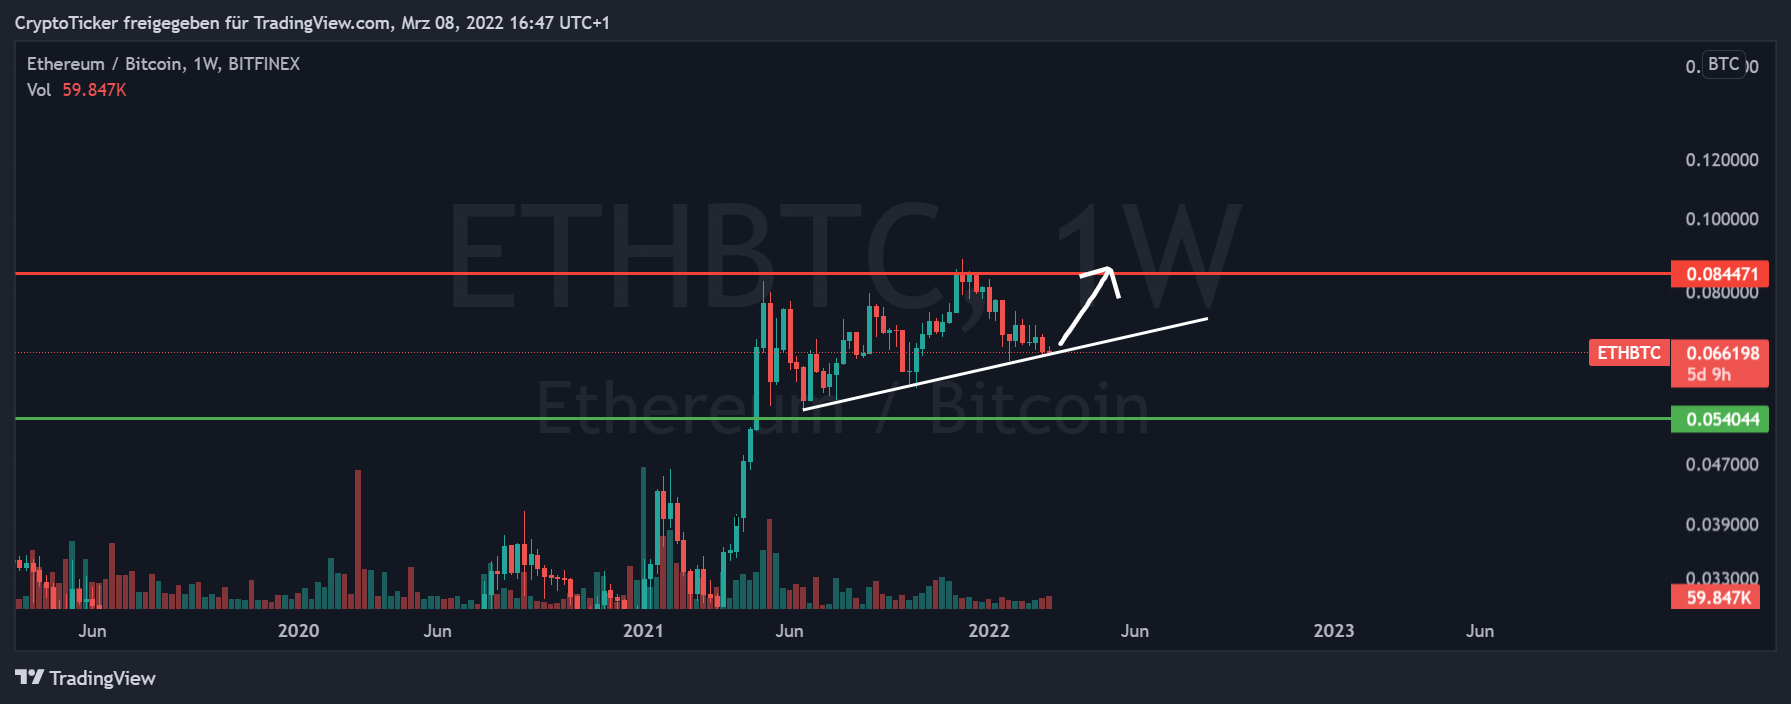 bitcoin or ethereum: ETH/BTC 1-week chart showing the potential reversal in favor of ETH